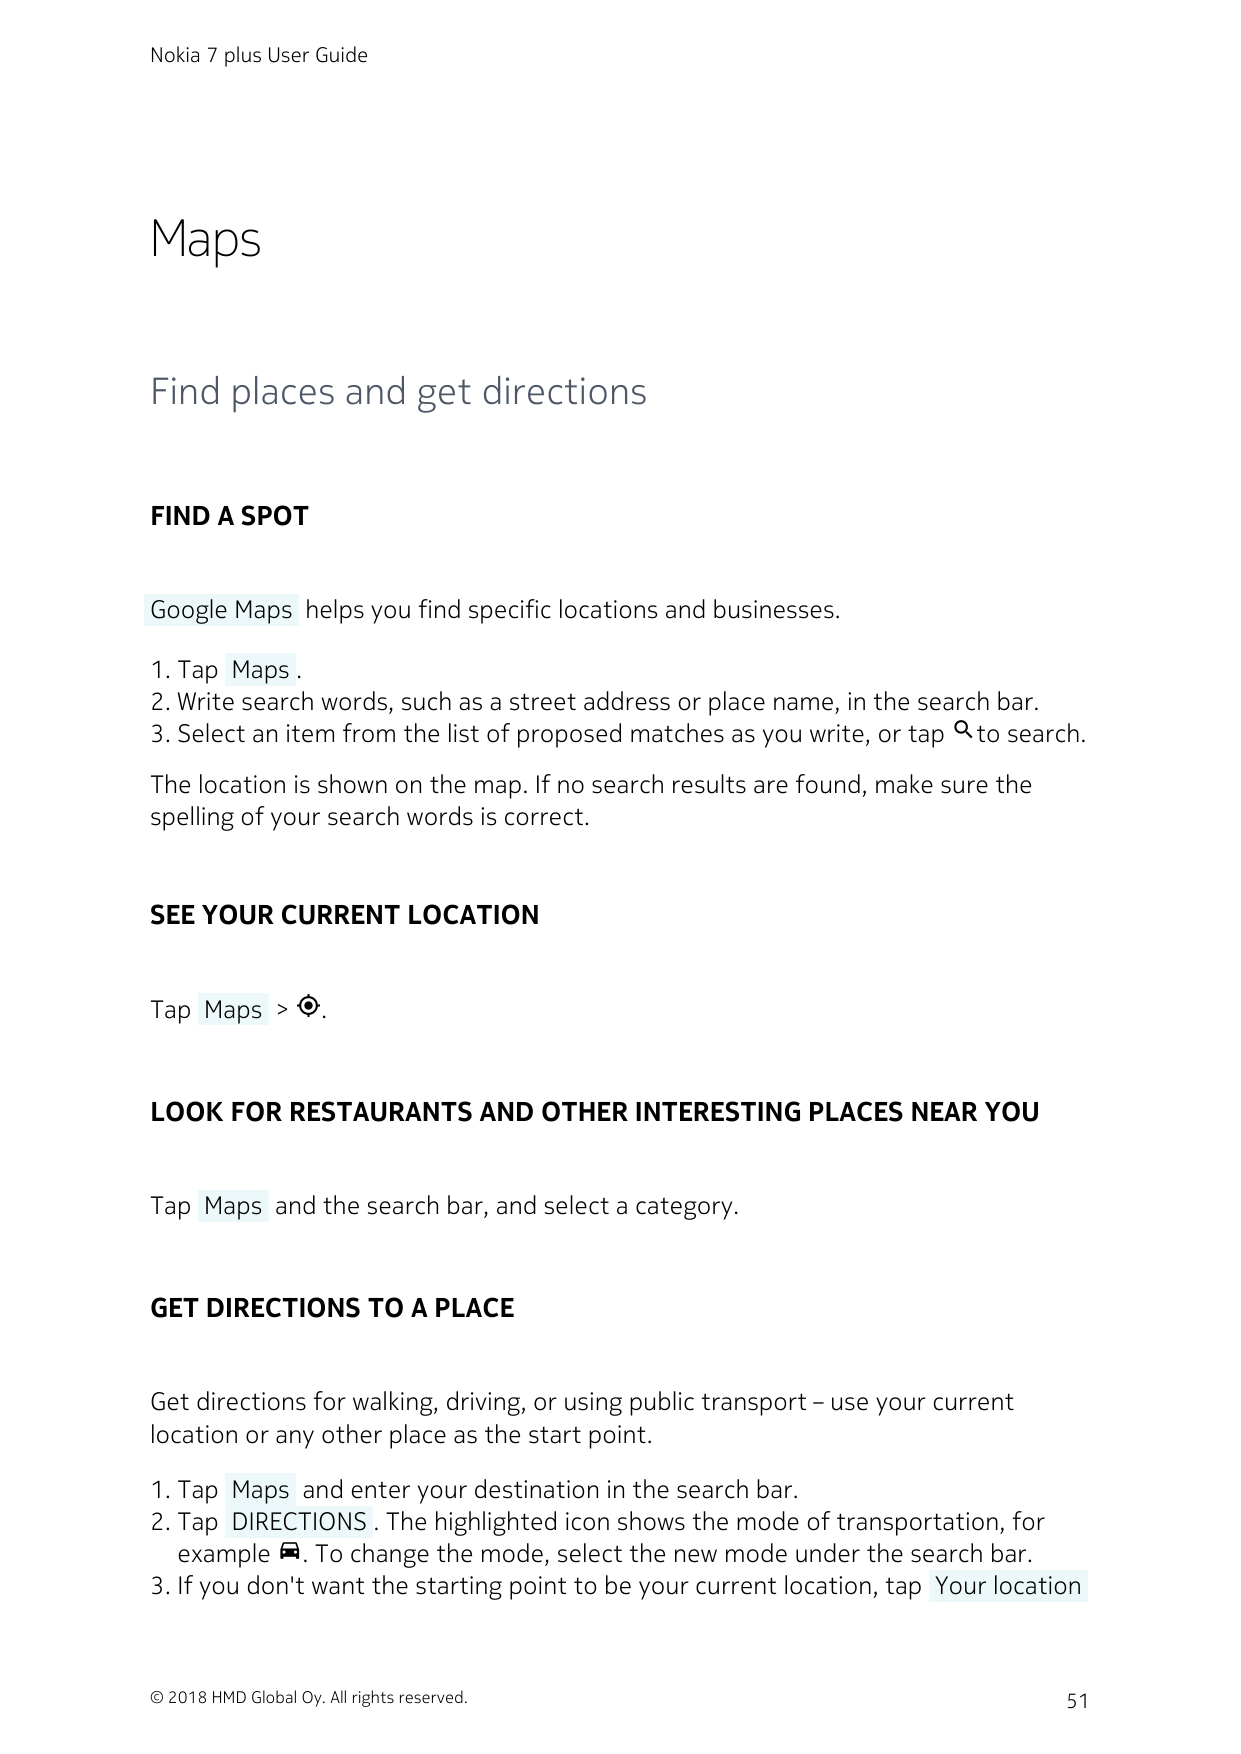 Nokia 7 plus User GuideMapsFind places and get directionsFIND A SPOT Google Maps  helps you find specific locations and business